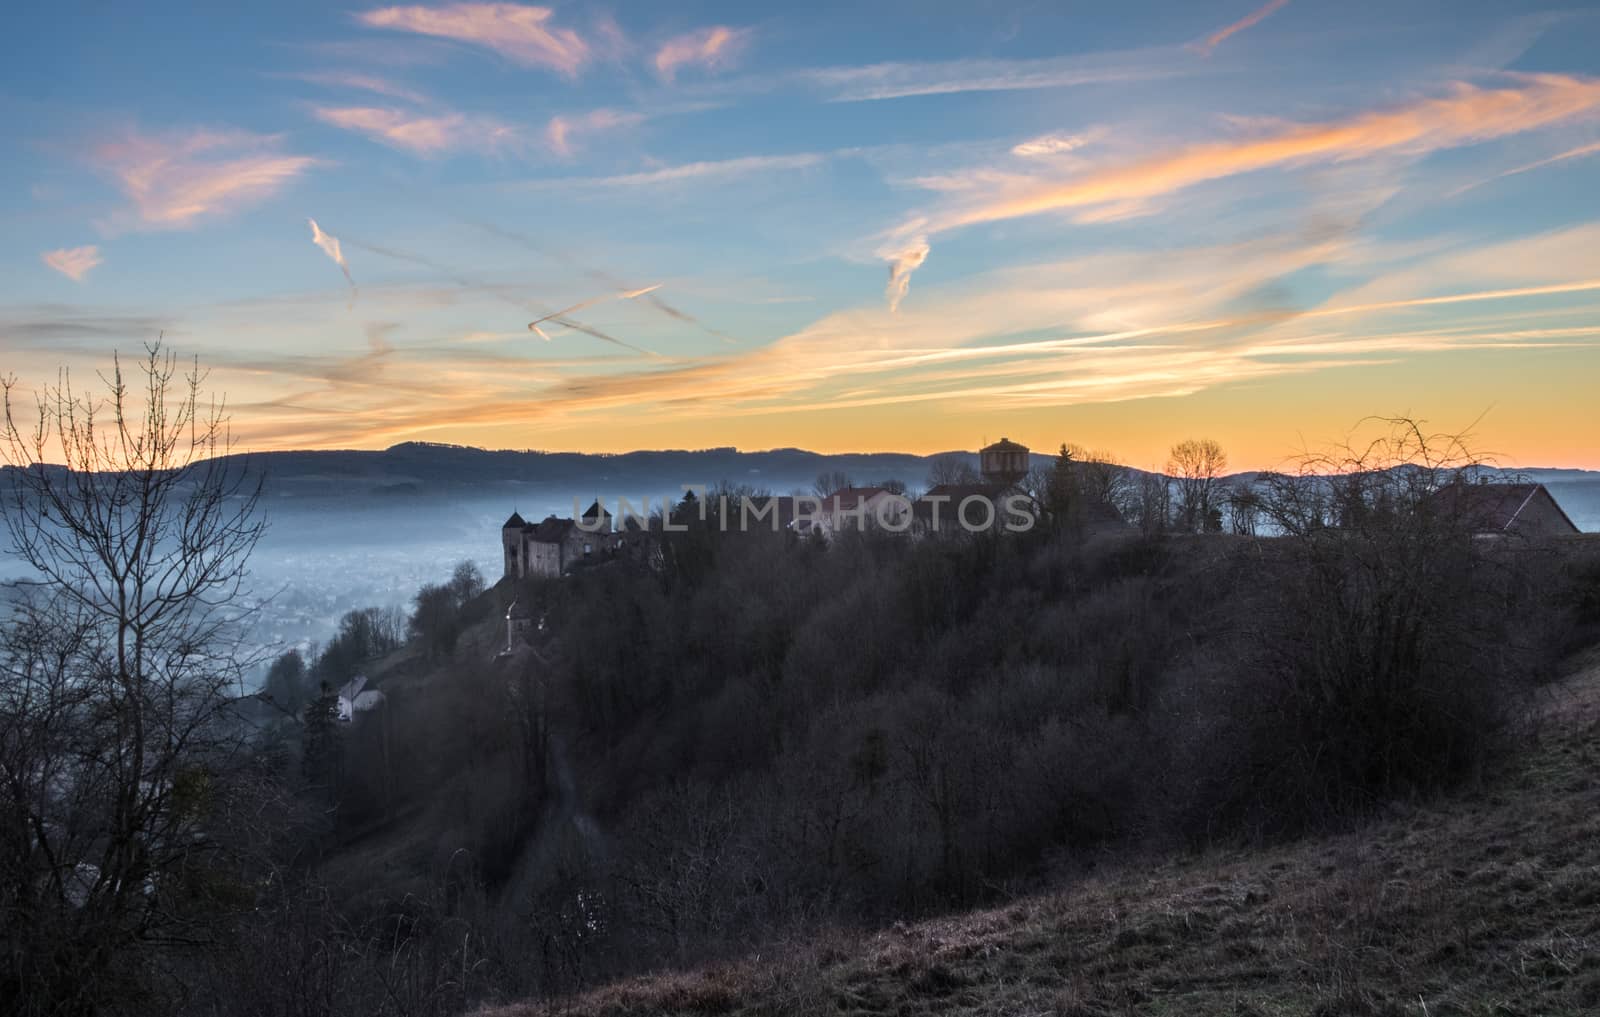 HDR shot of Belvoir castle in France. Landscape of small mountains, fields and forest